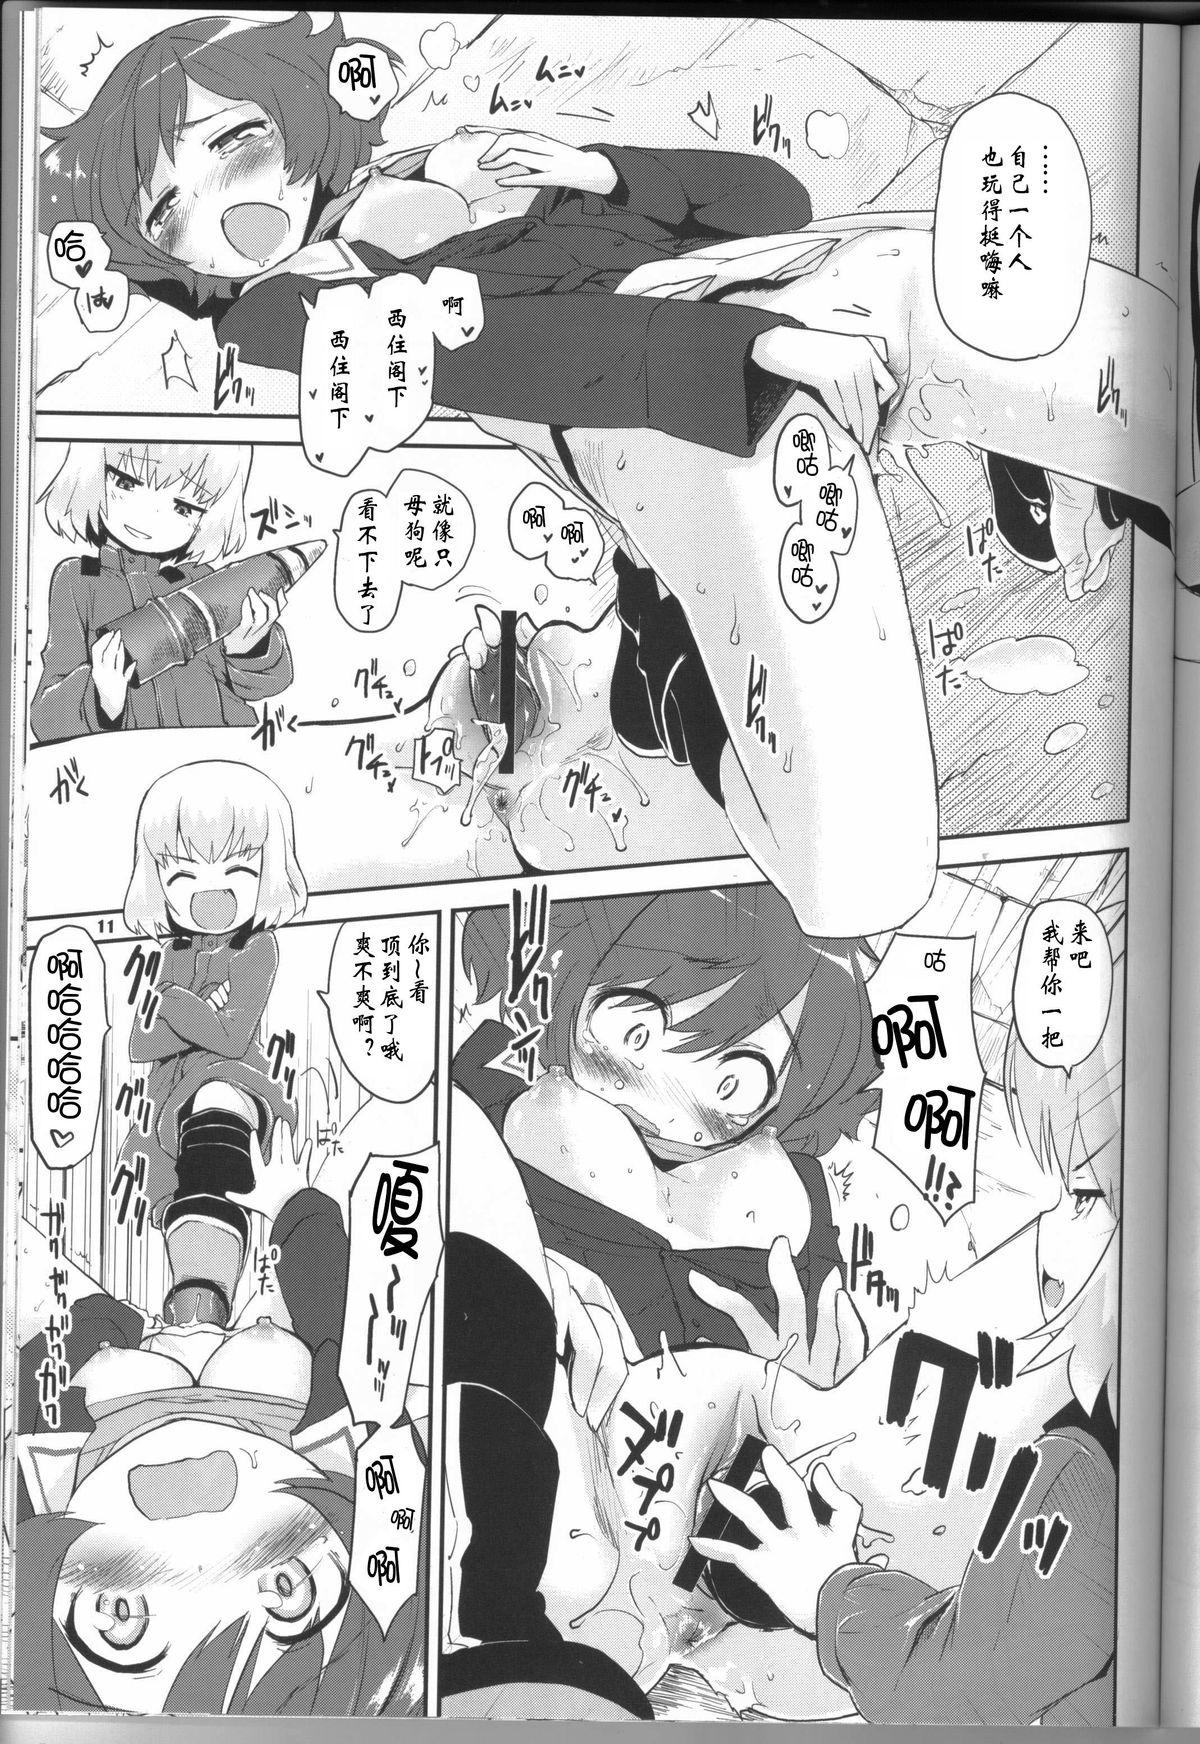 Licking The General Frost Has Come! - Girls und panzer Milk - Page 10